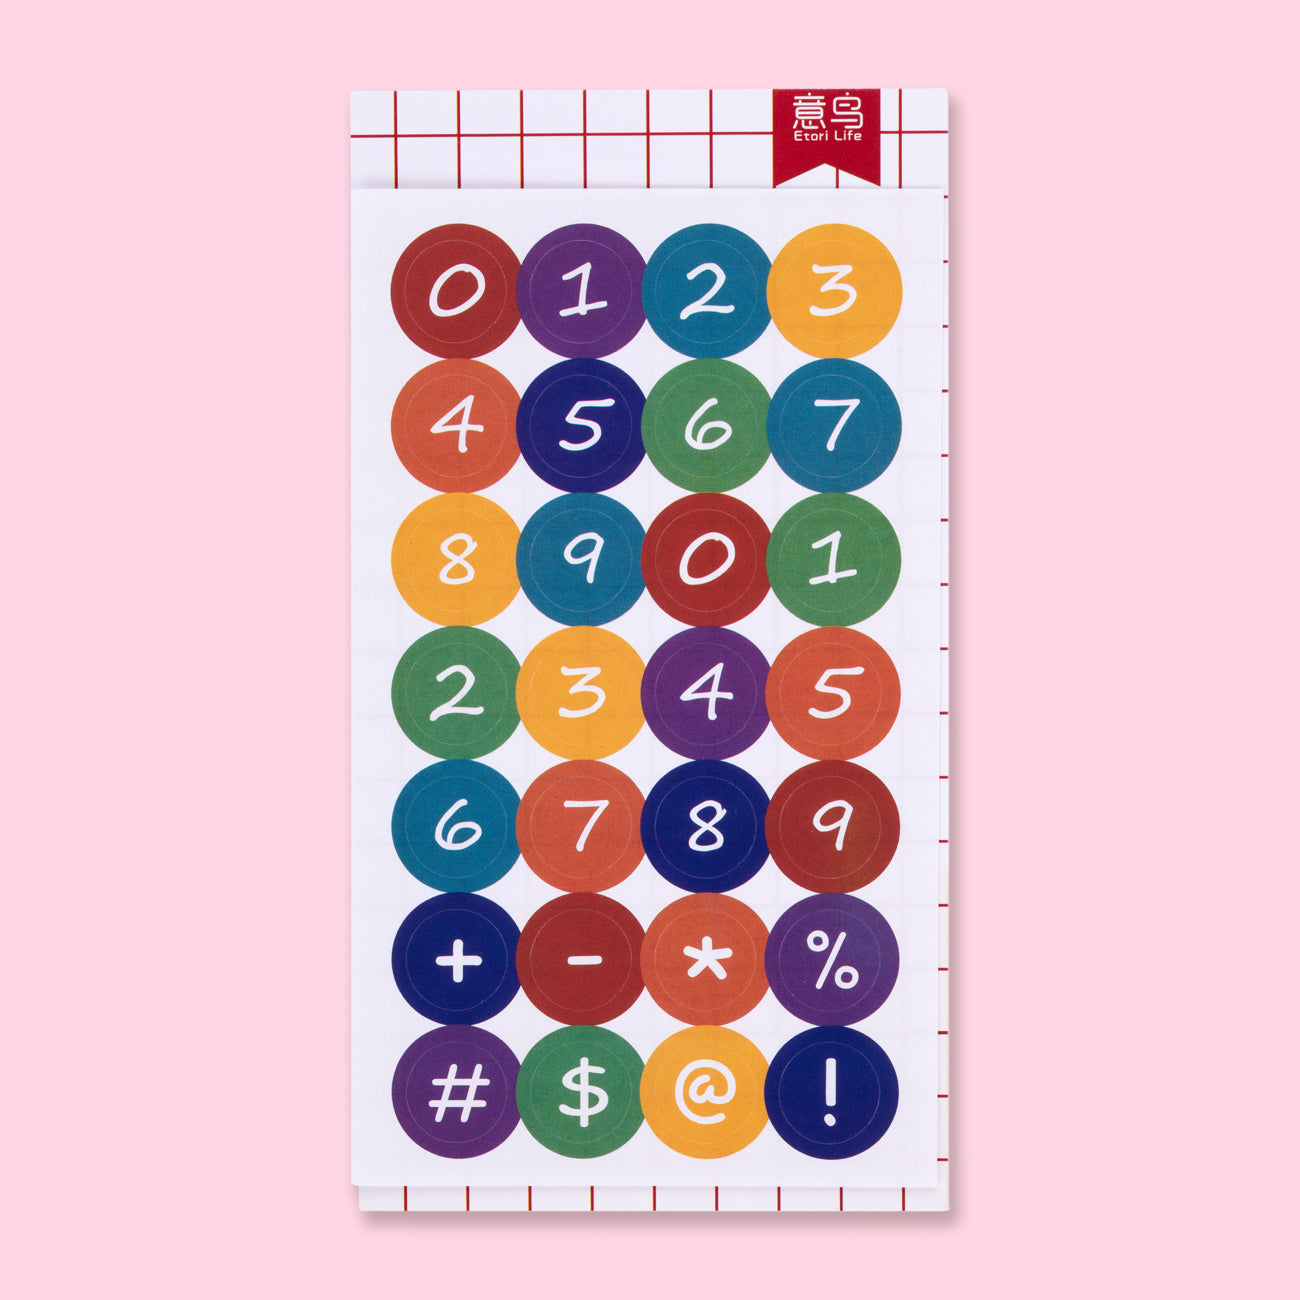 342 Everyday Digital Journaling Stickers Pack — Stationery Pal